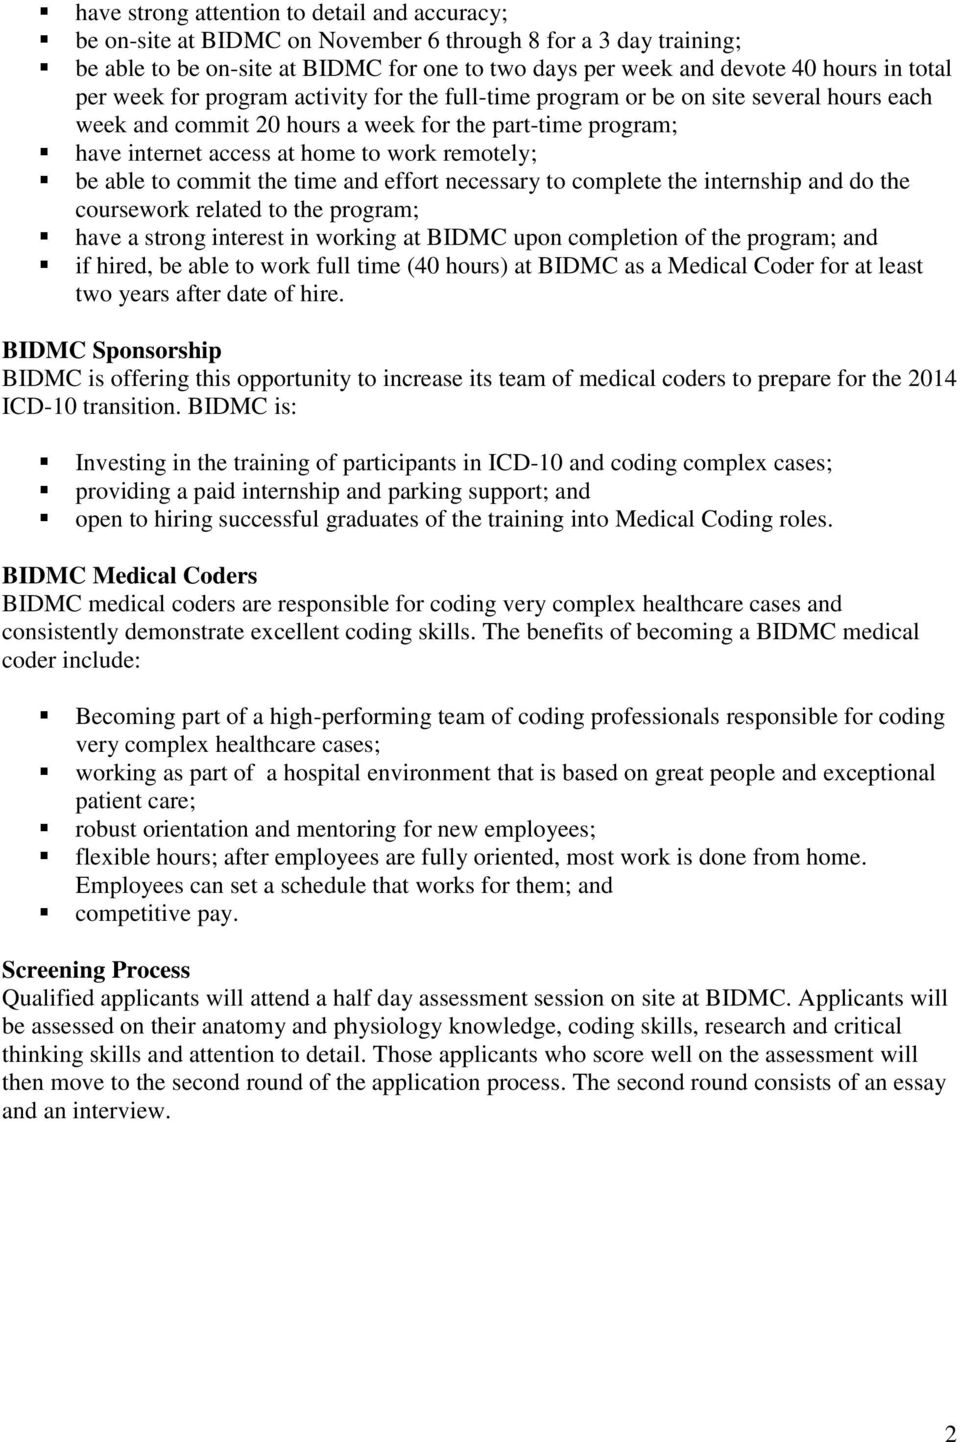 remotely; be able to commit the time and effort necessary to complete the internship and do the coursework related to the program; have a strong interest in working at BIDMC upon completion of the